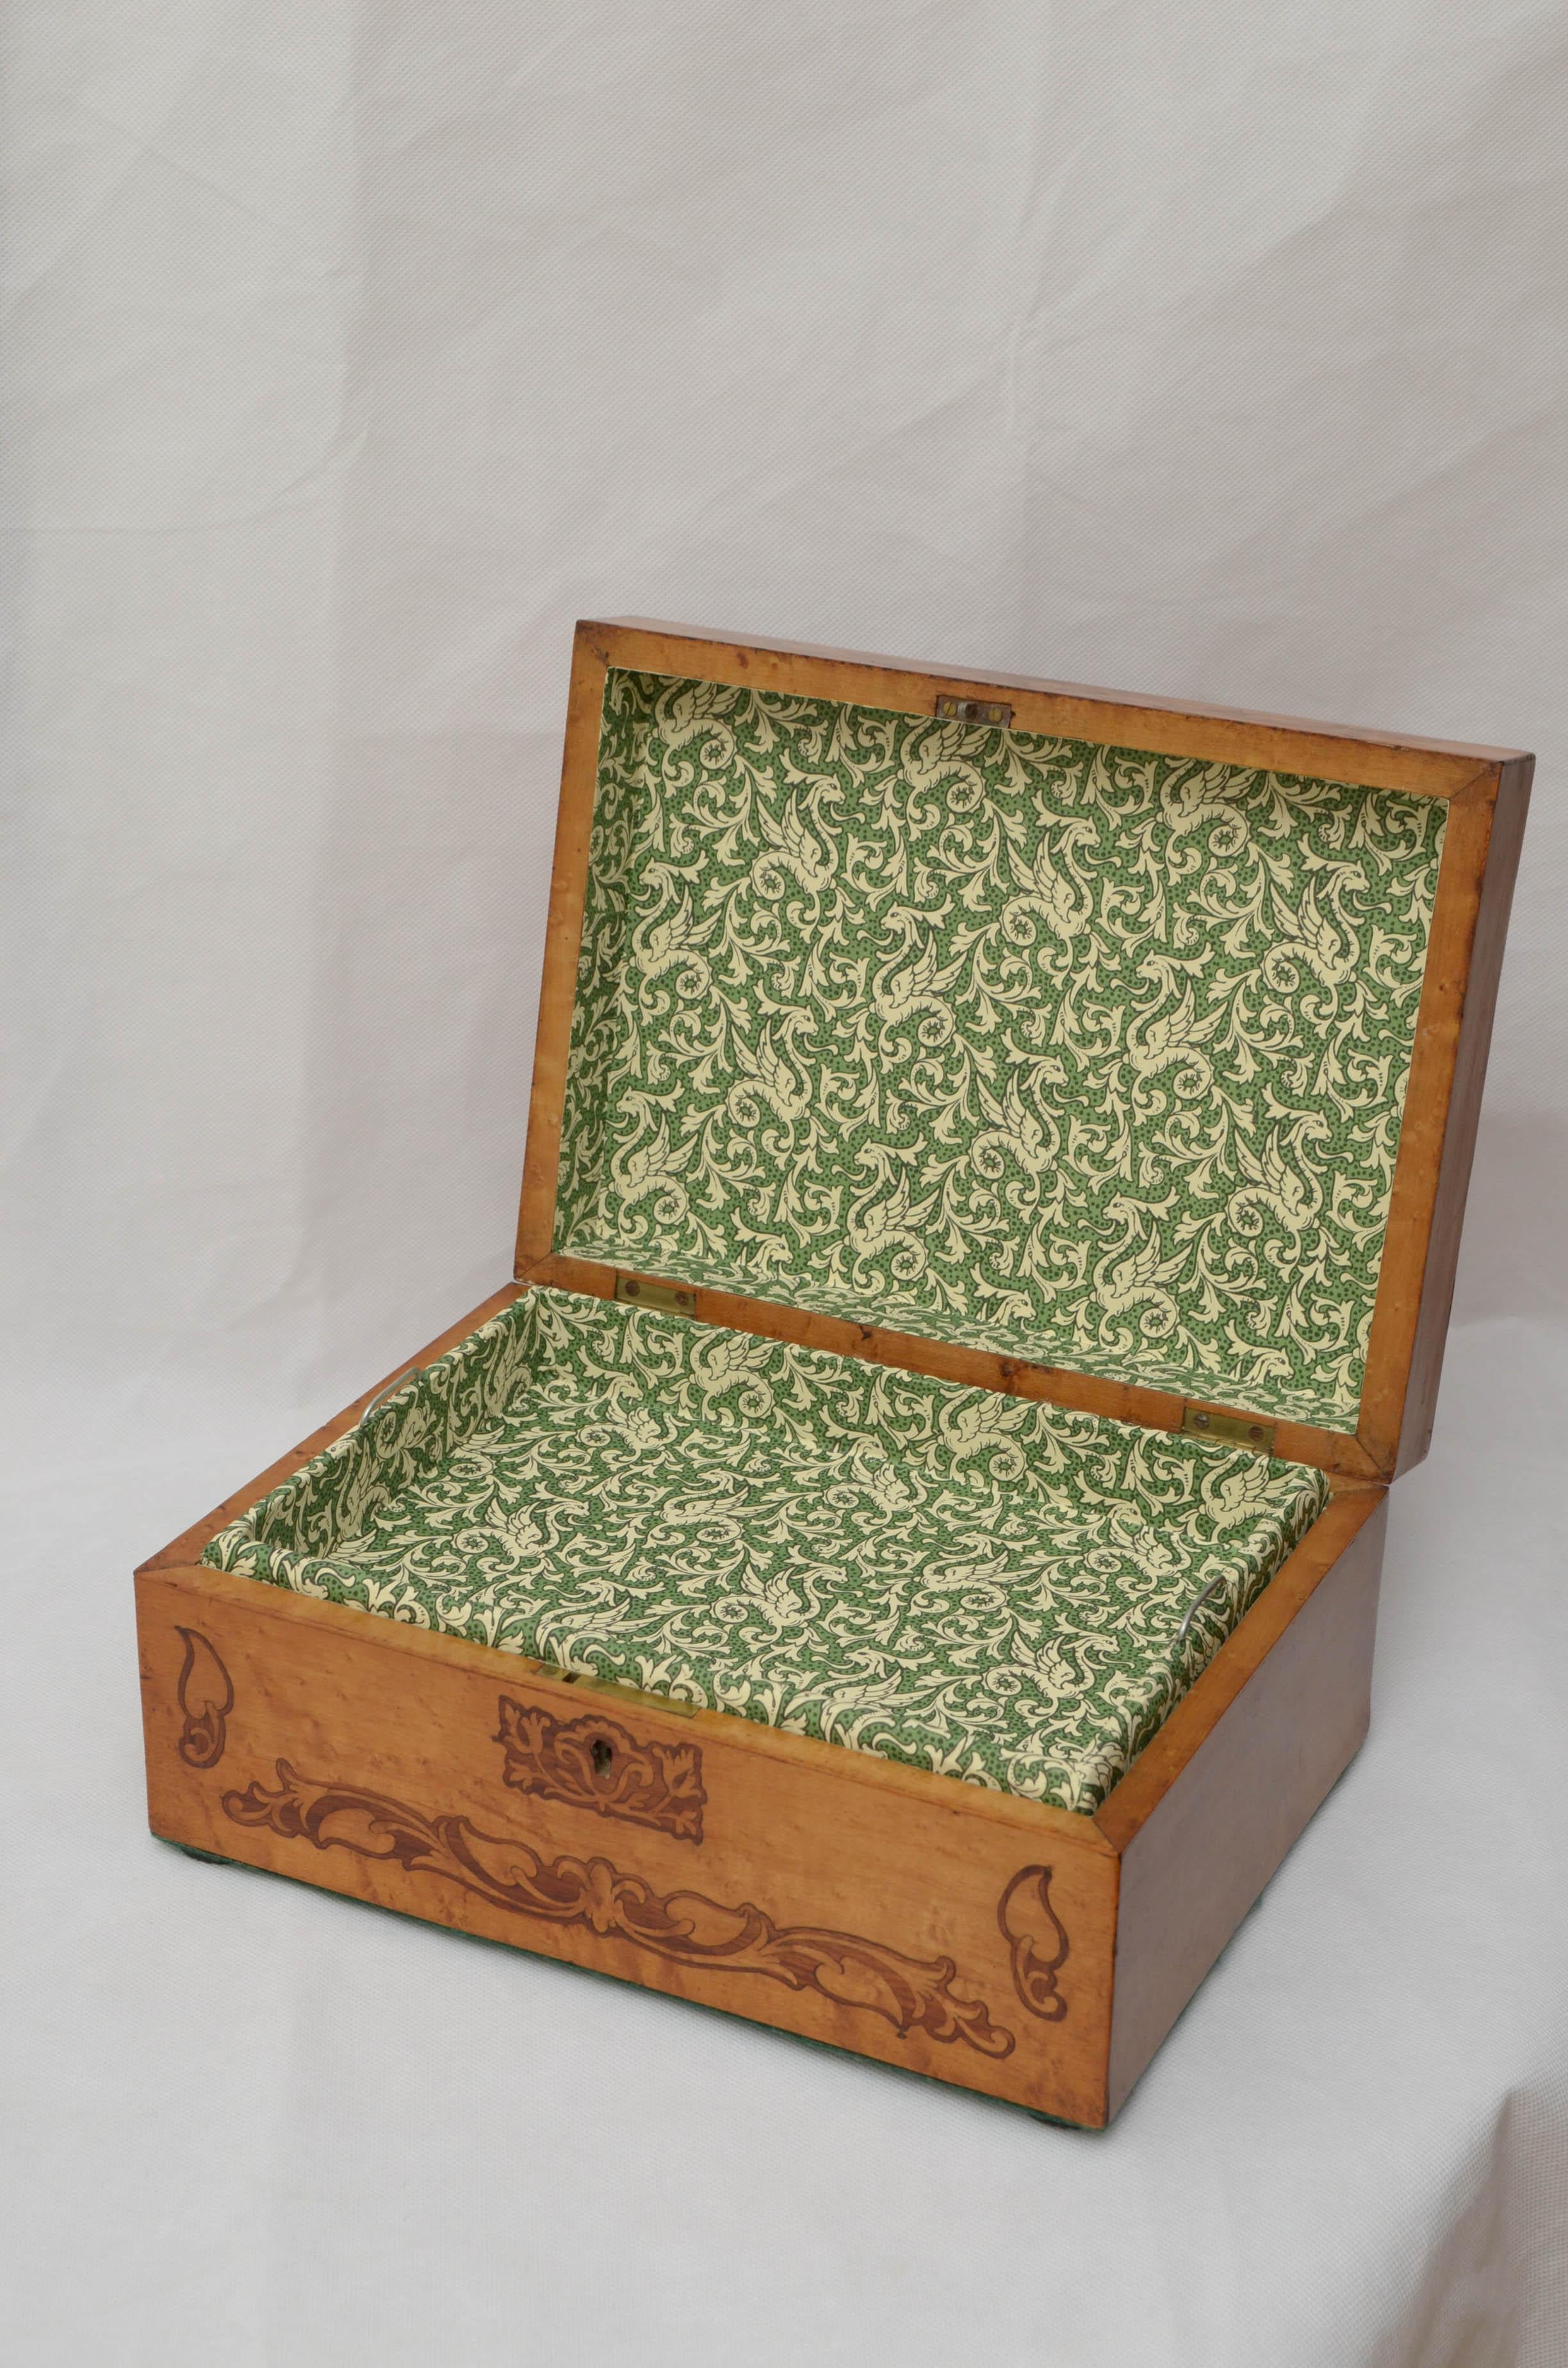 0121 super Victorian bird's eye maple and tulipwood jewelry box or sewing box, having finely inlaid front and lid which opens to reveal new relined interior with lift up tray. This antique box has been sympathetically restored including interior,